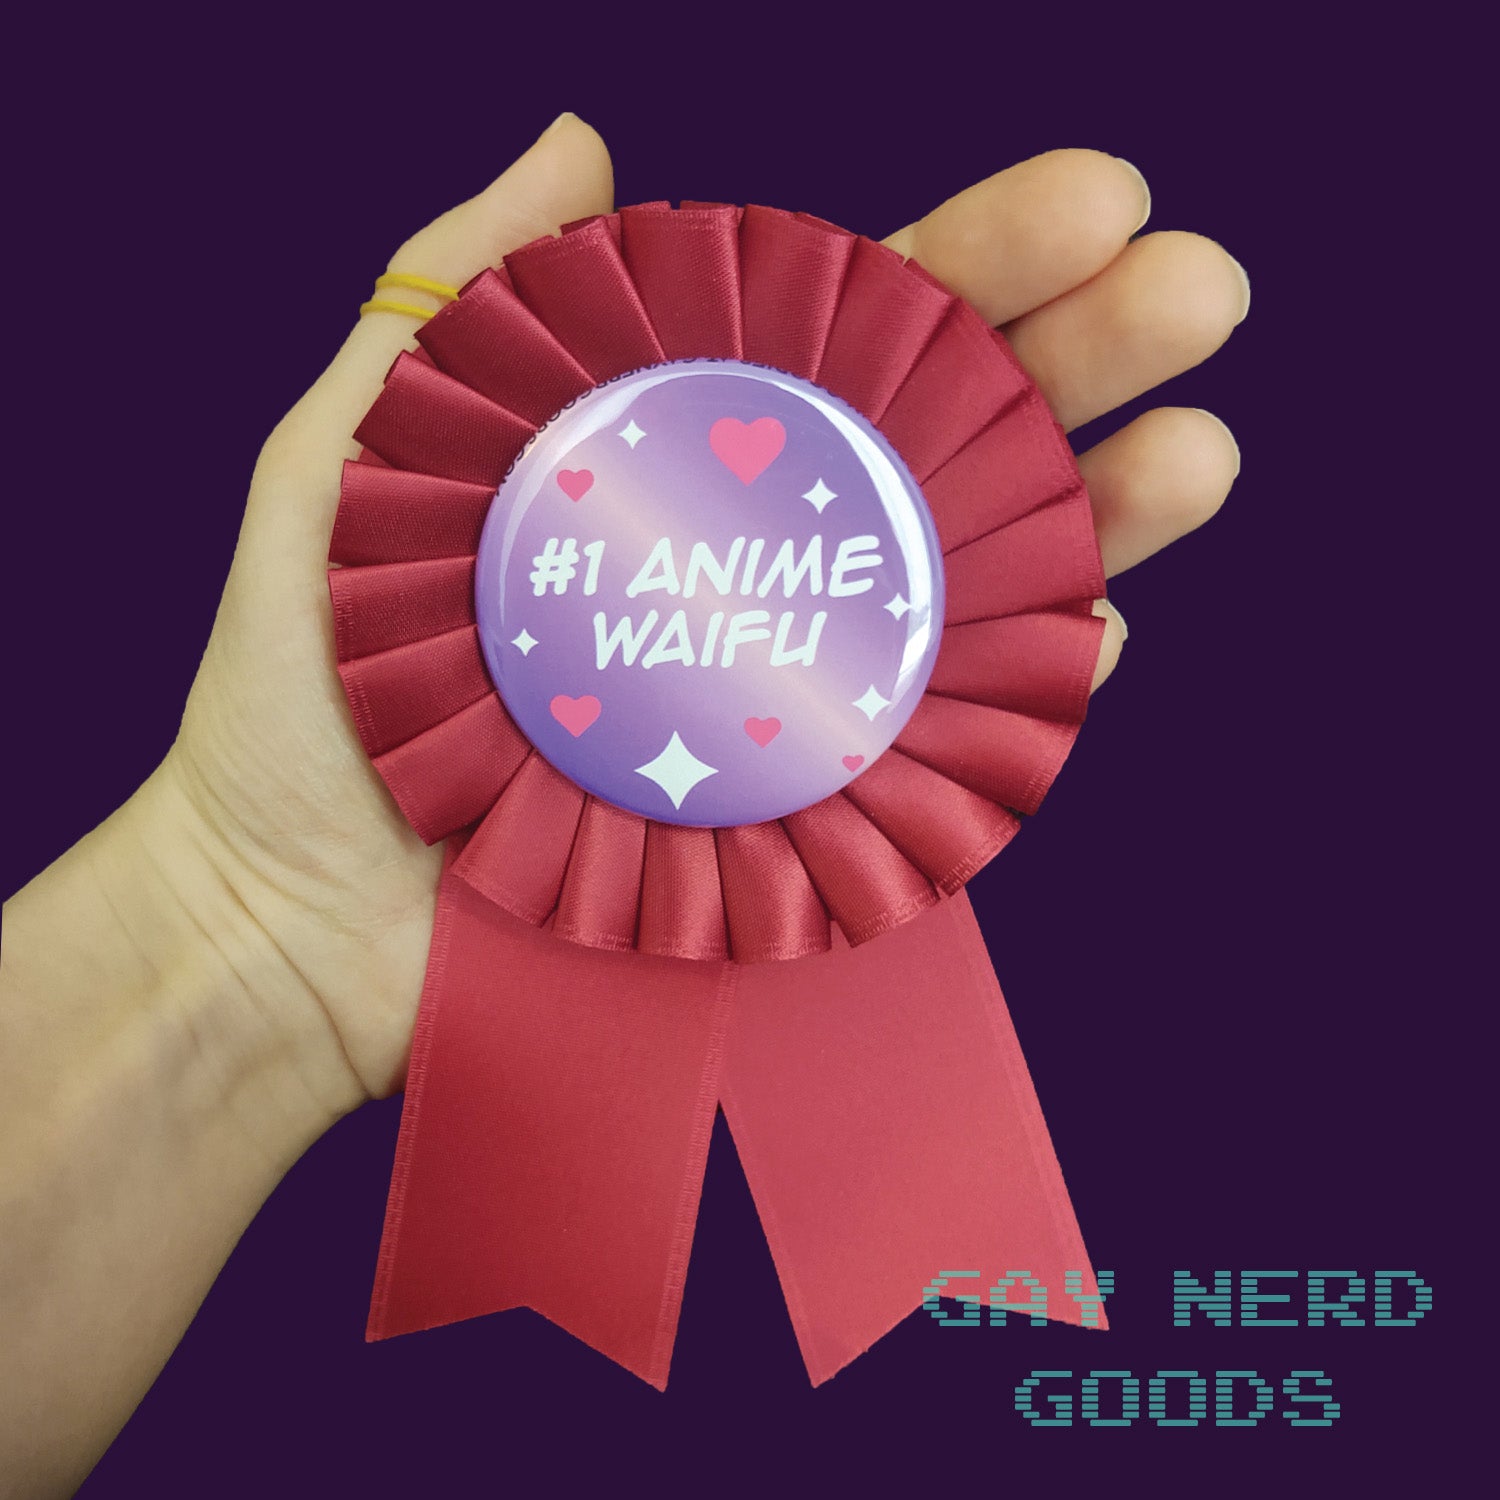 hand holding the red #1 anime waifu award ribbon against a purple background